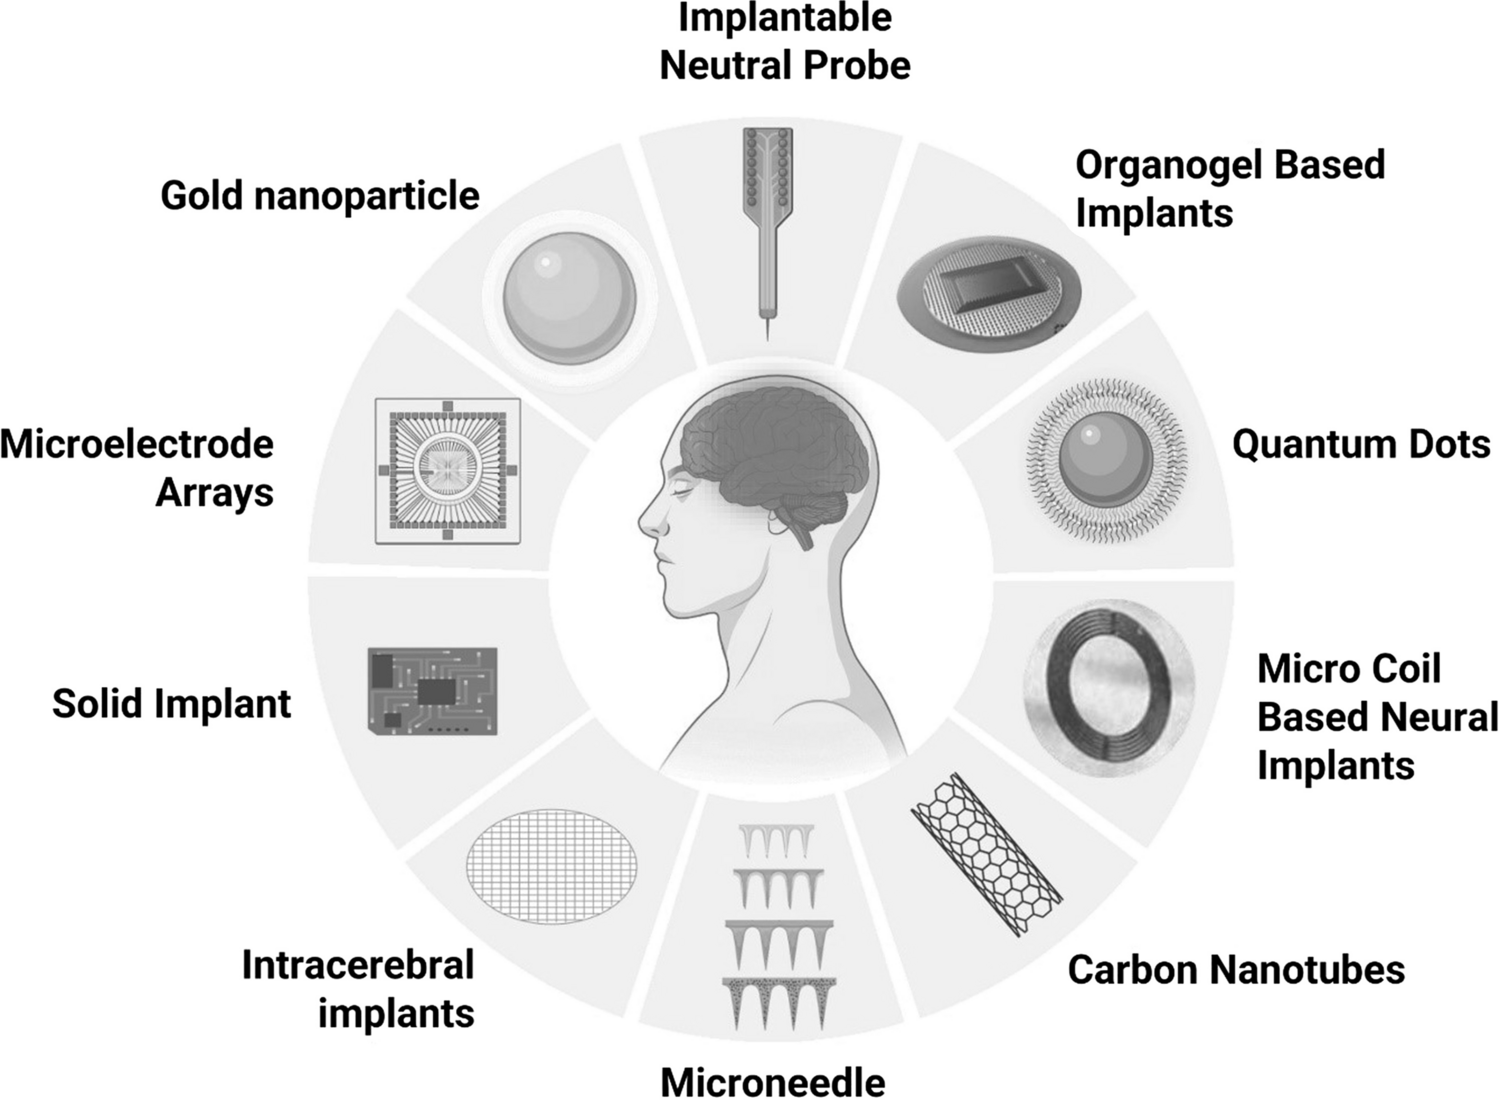 Biomaterials Comprising Implantable and Dermal Drug Delivery Targeting Brain in Management of Alzheimer’s Disease: A Review